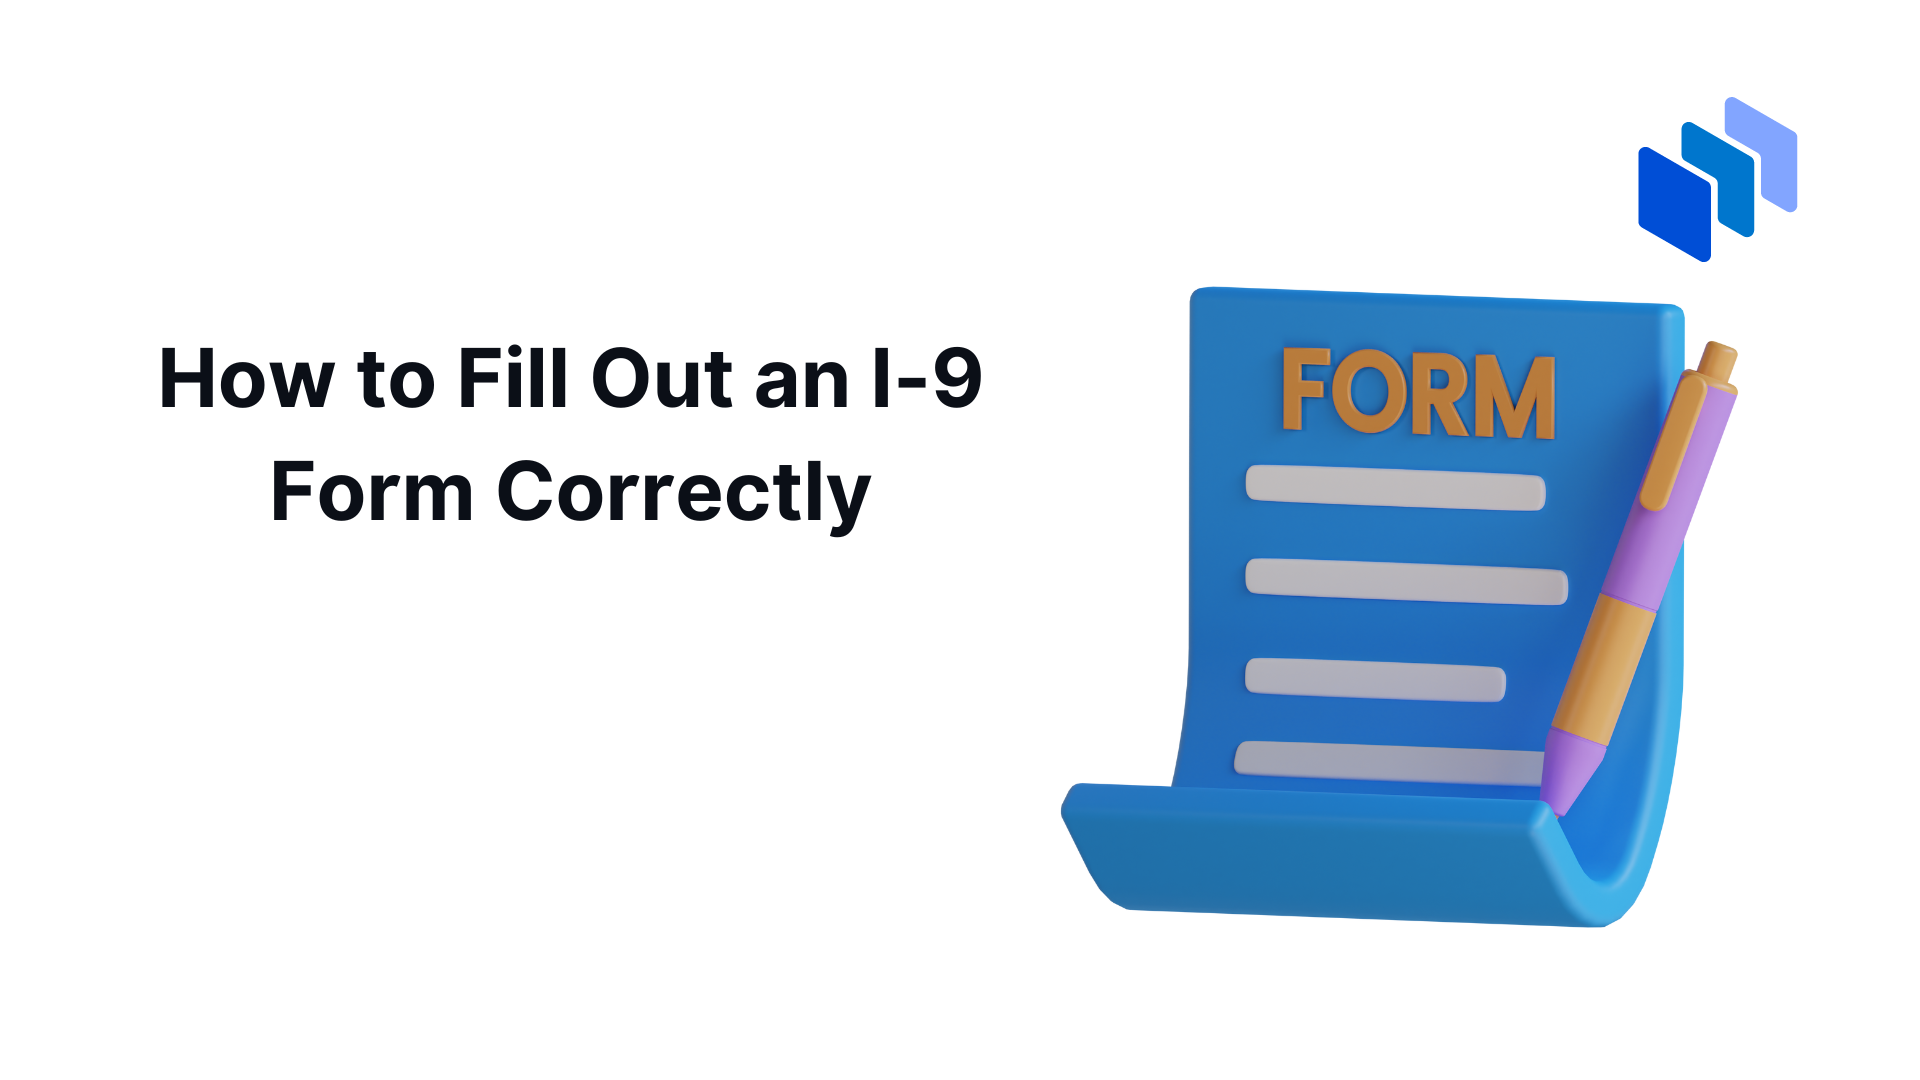 How to Fill Out an I-9 Form Correctly